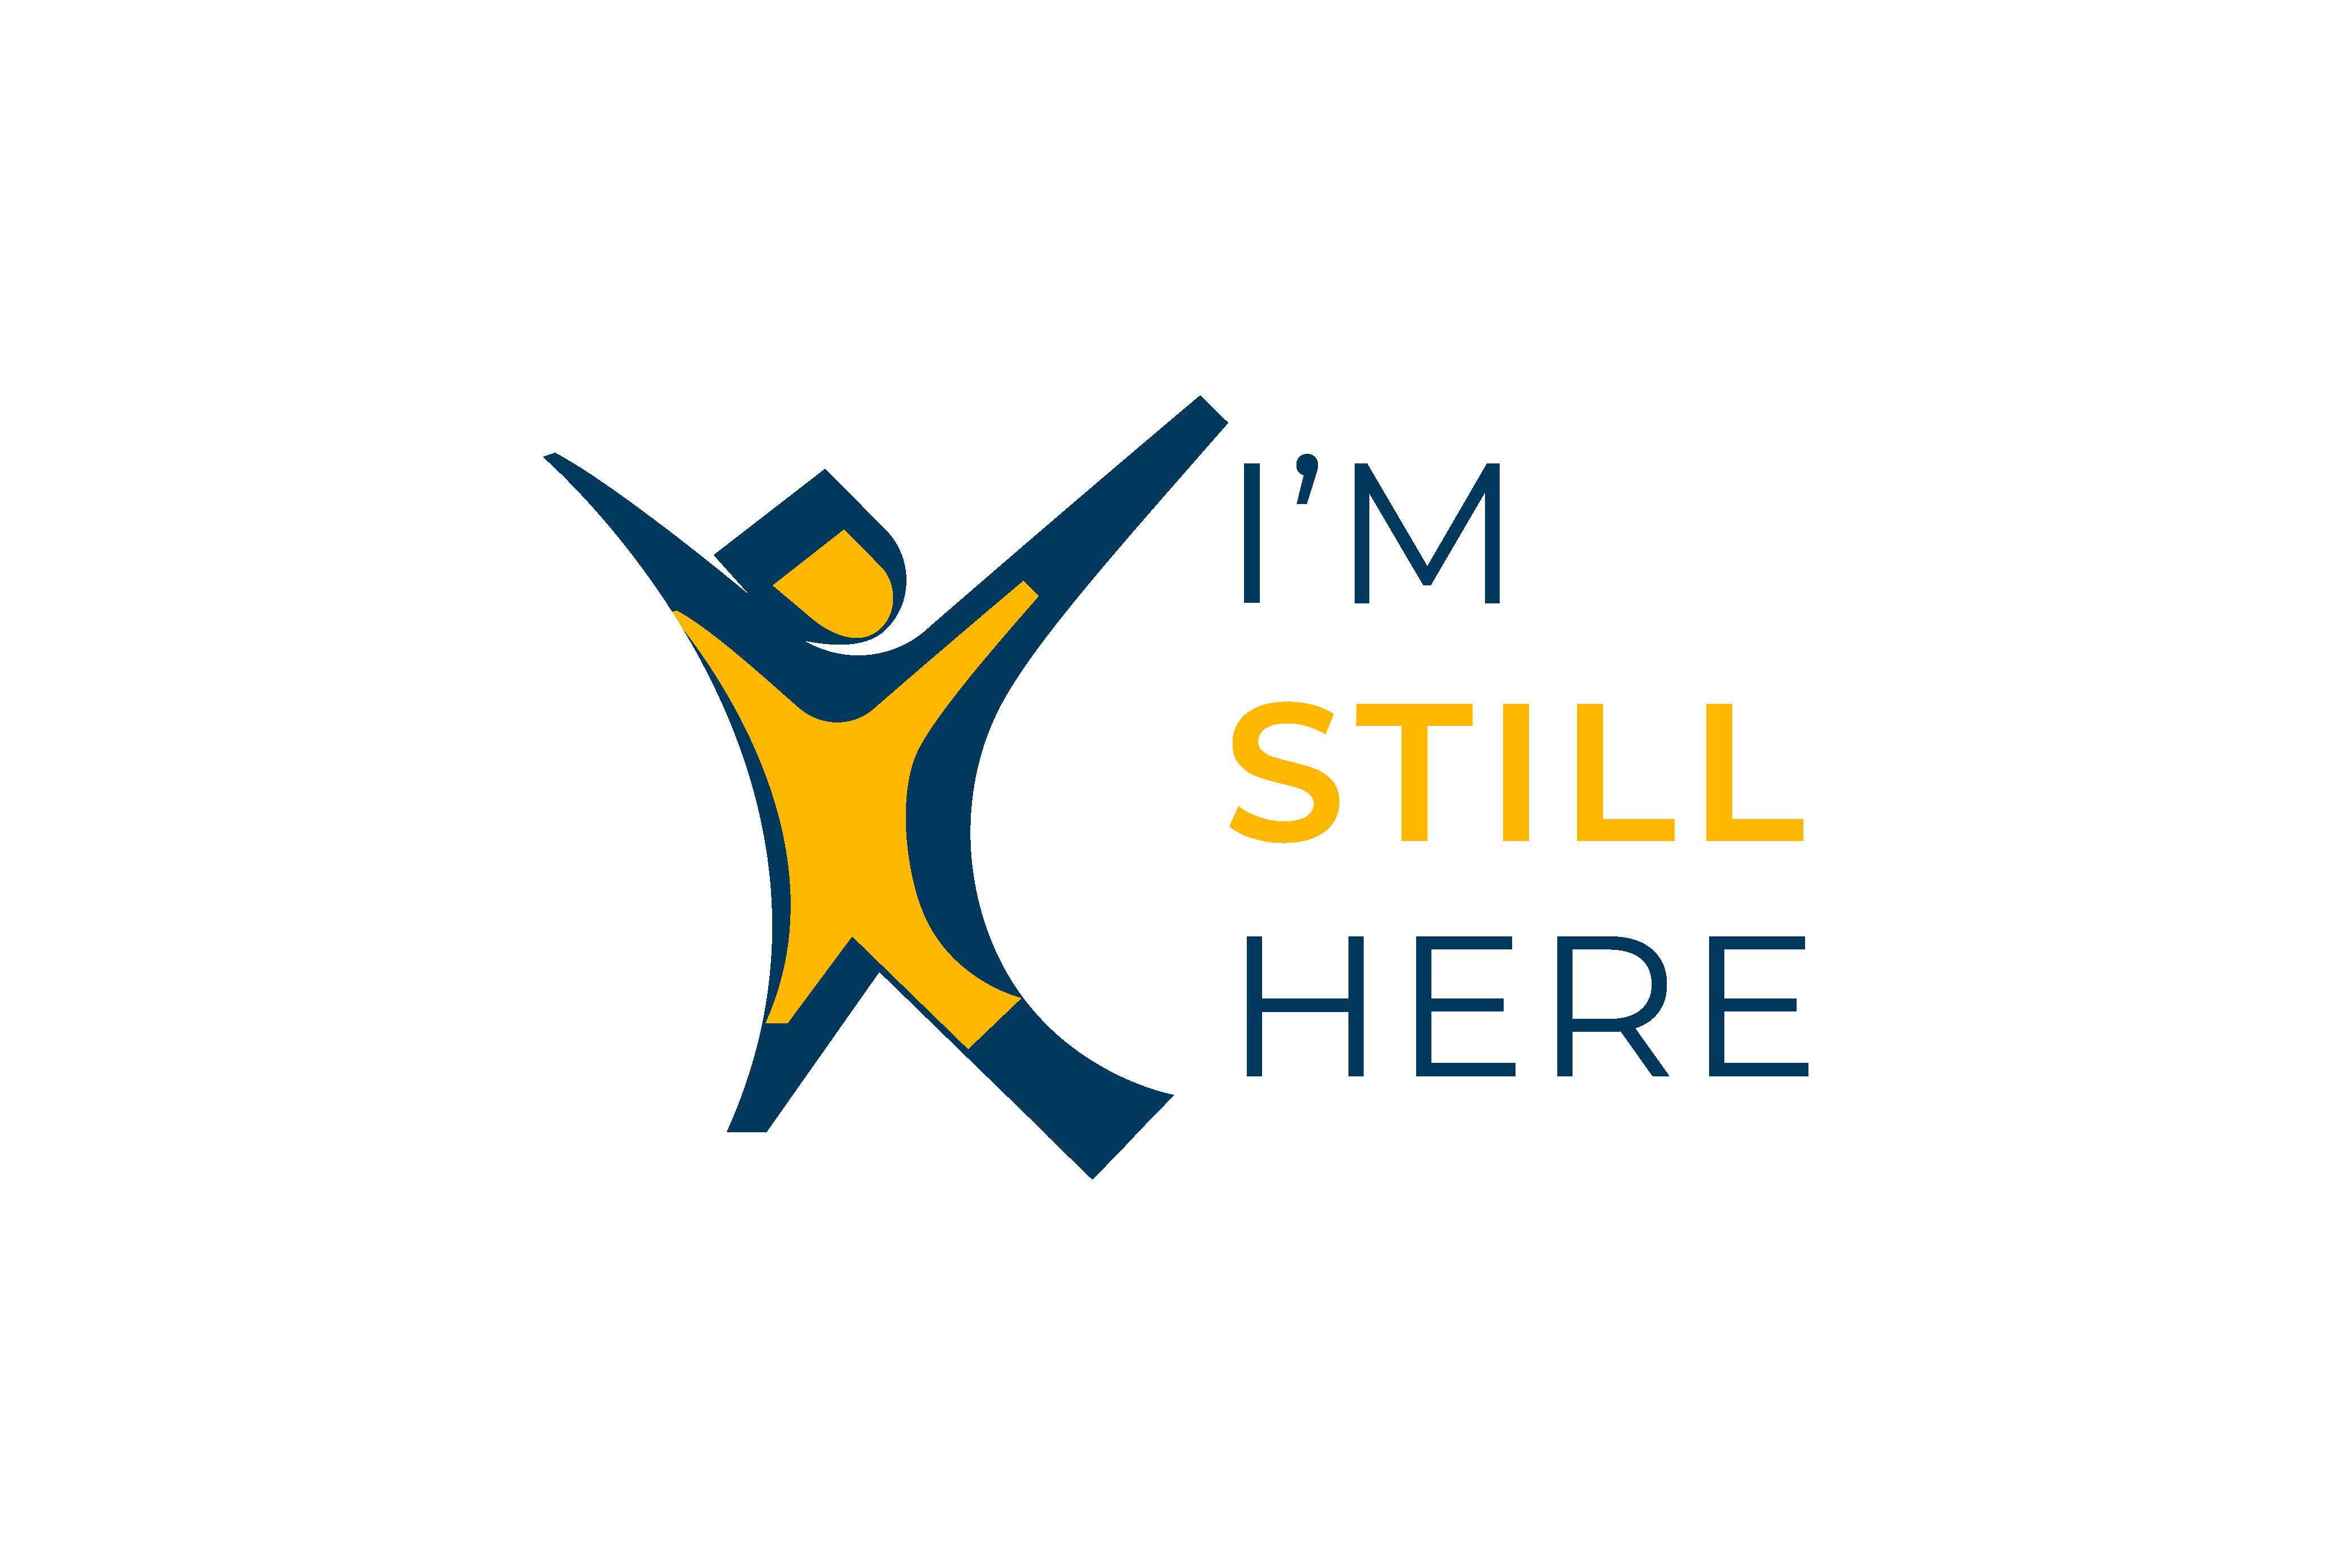 I’m Still Here (ISH) helps people living with dementia to flourish through engagement in life, family and community. ISH supports programs that engage persons living with dementia and their care partners in arts, culture and community. ISH seeks to spread the message of hope and possibility, especially to underserved individuals and communities.